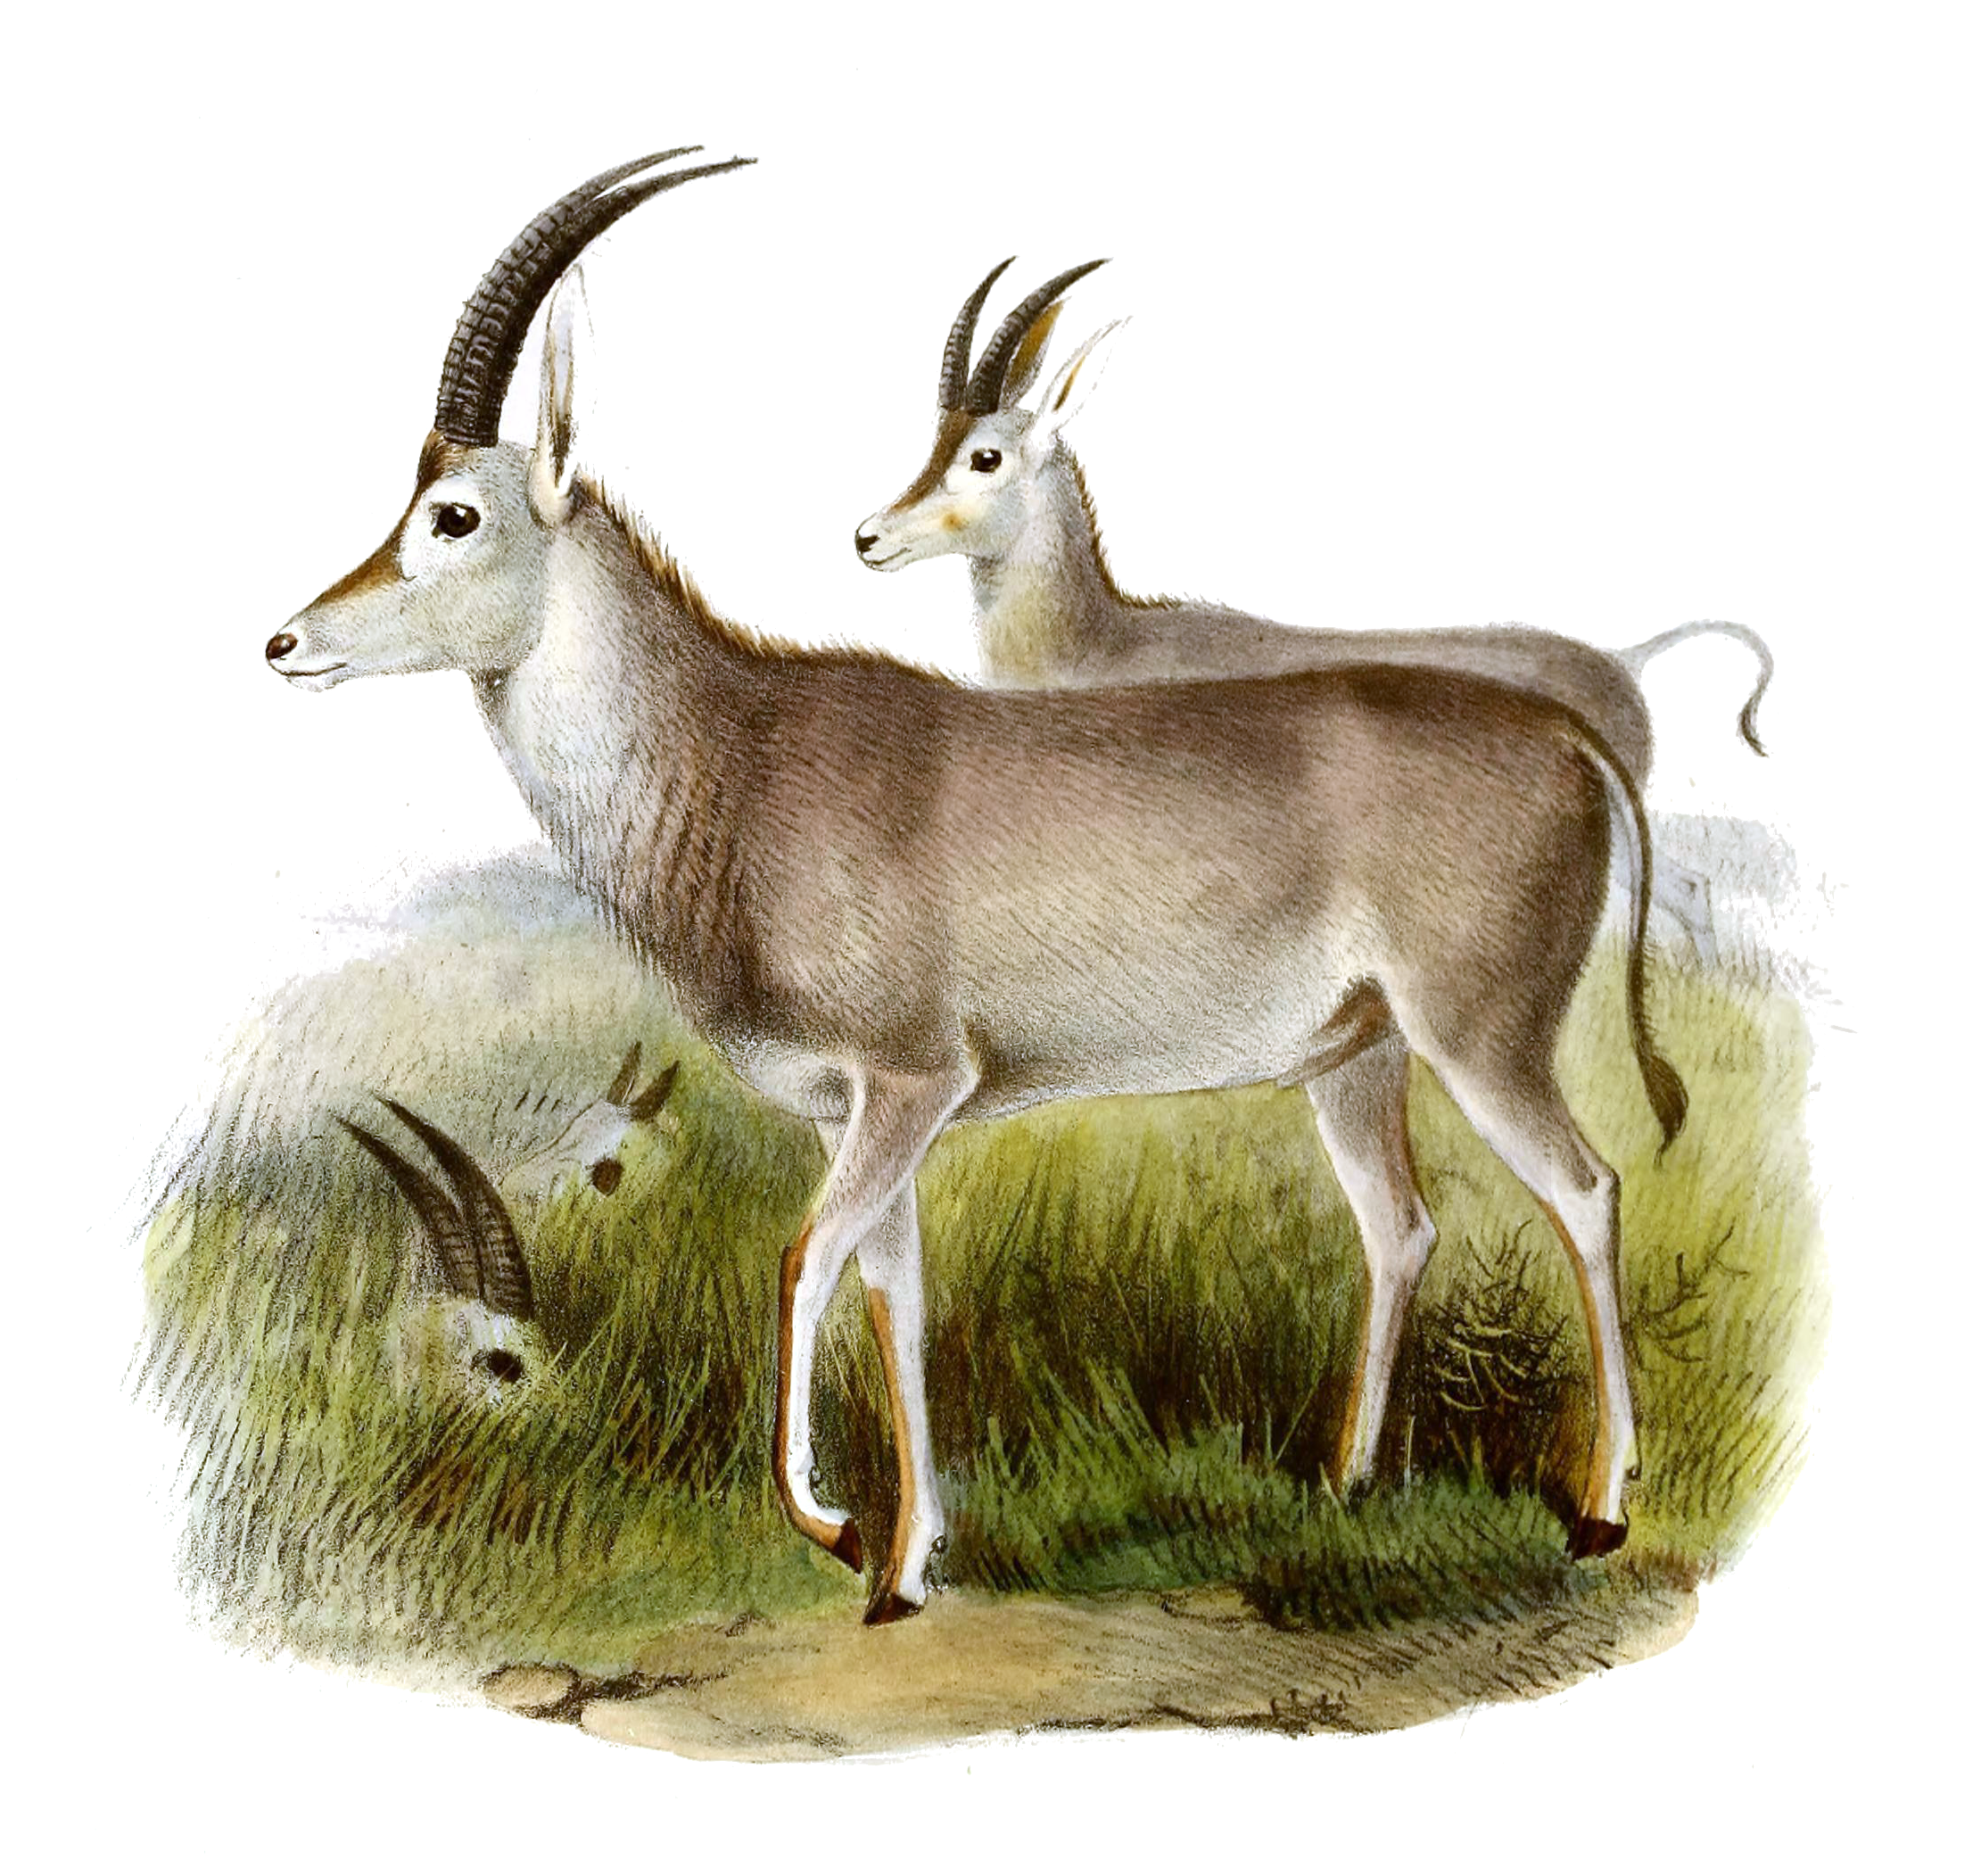 Male and female bluebuck 'Hippotragus leucophaeus,' a tan antelope with a dark forehead and long ribbed back-sweeping horns; illustration by Joseph Smit and Joseph Wolf.